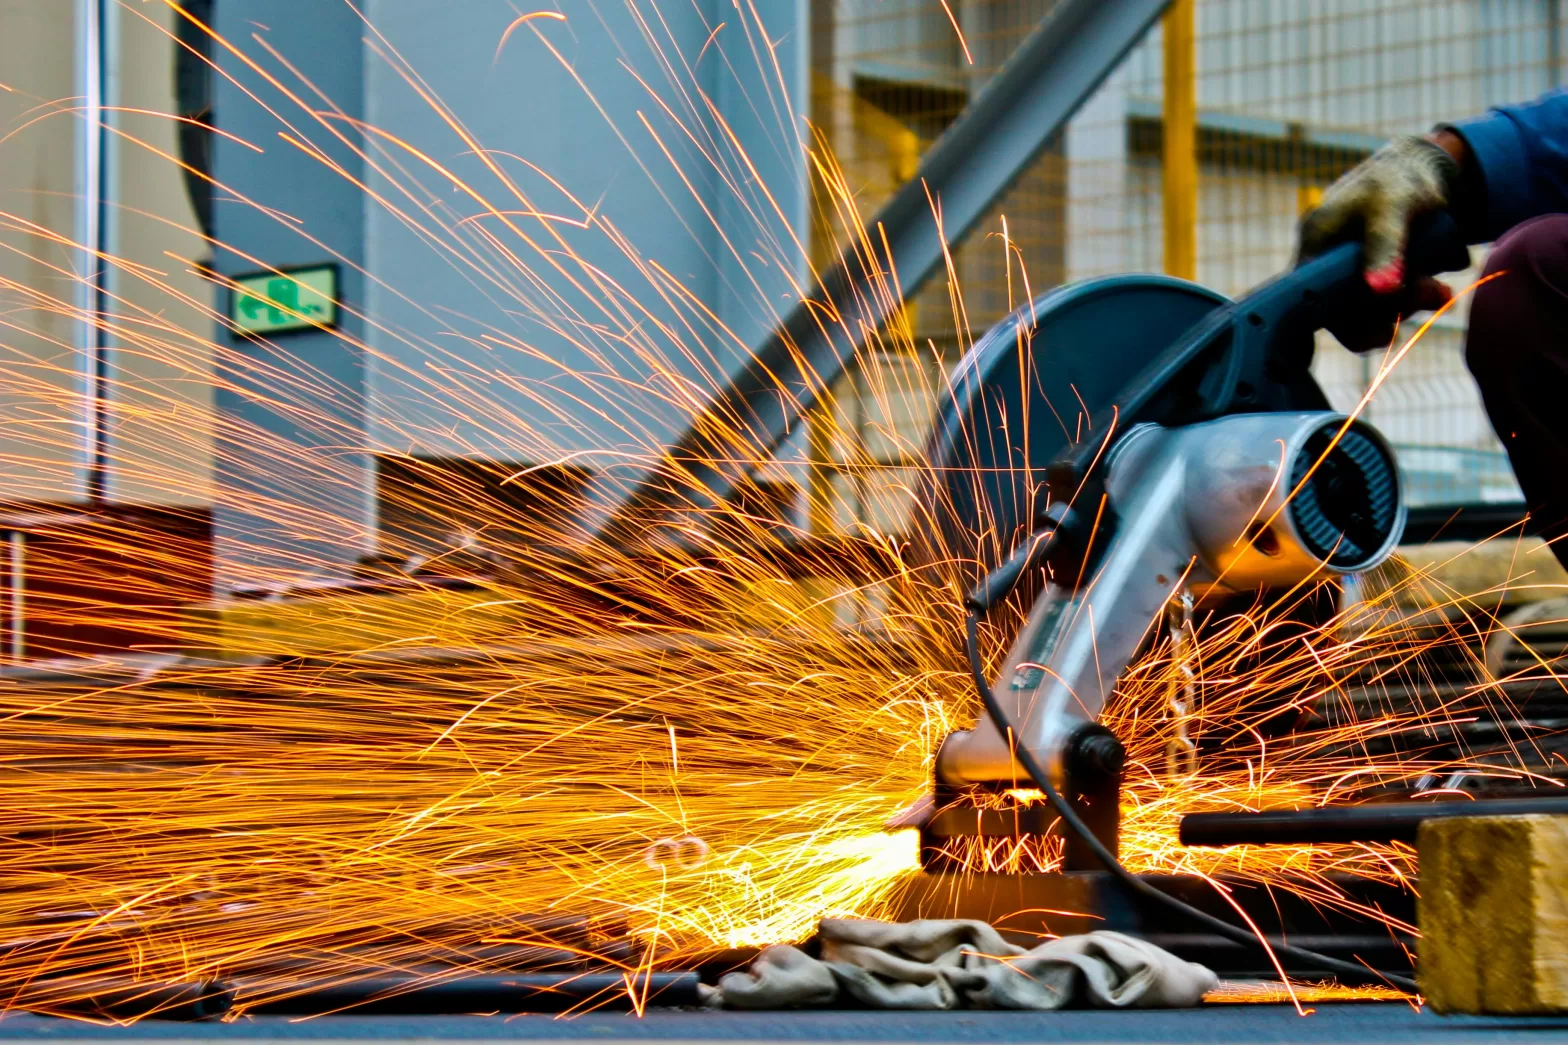 Worker using an angle grinder, producing a shower of sparks.